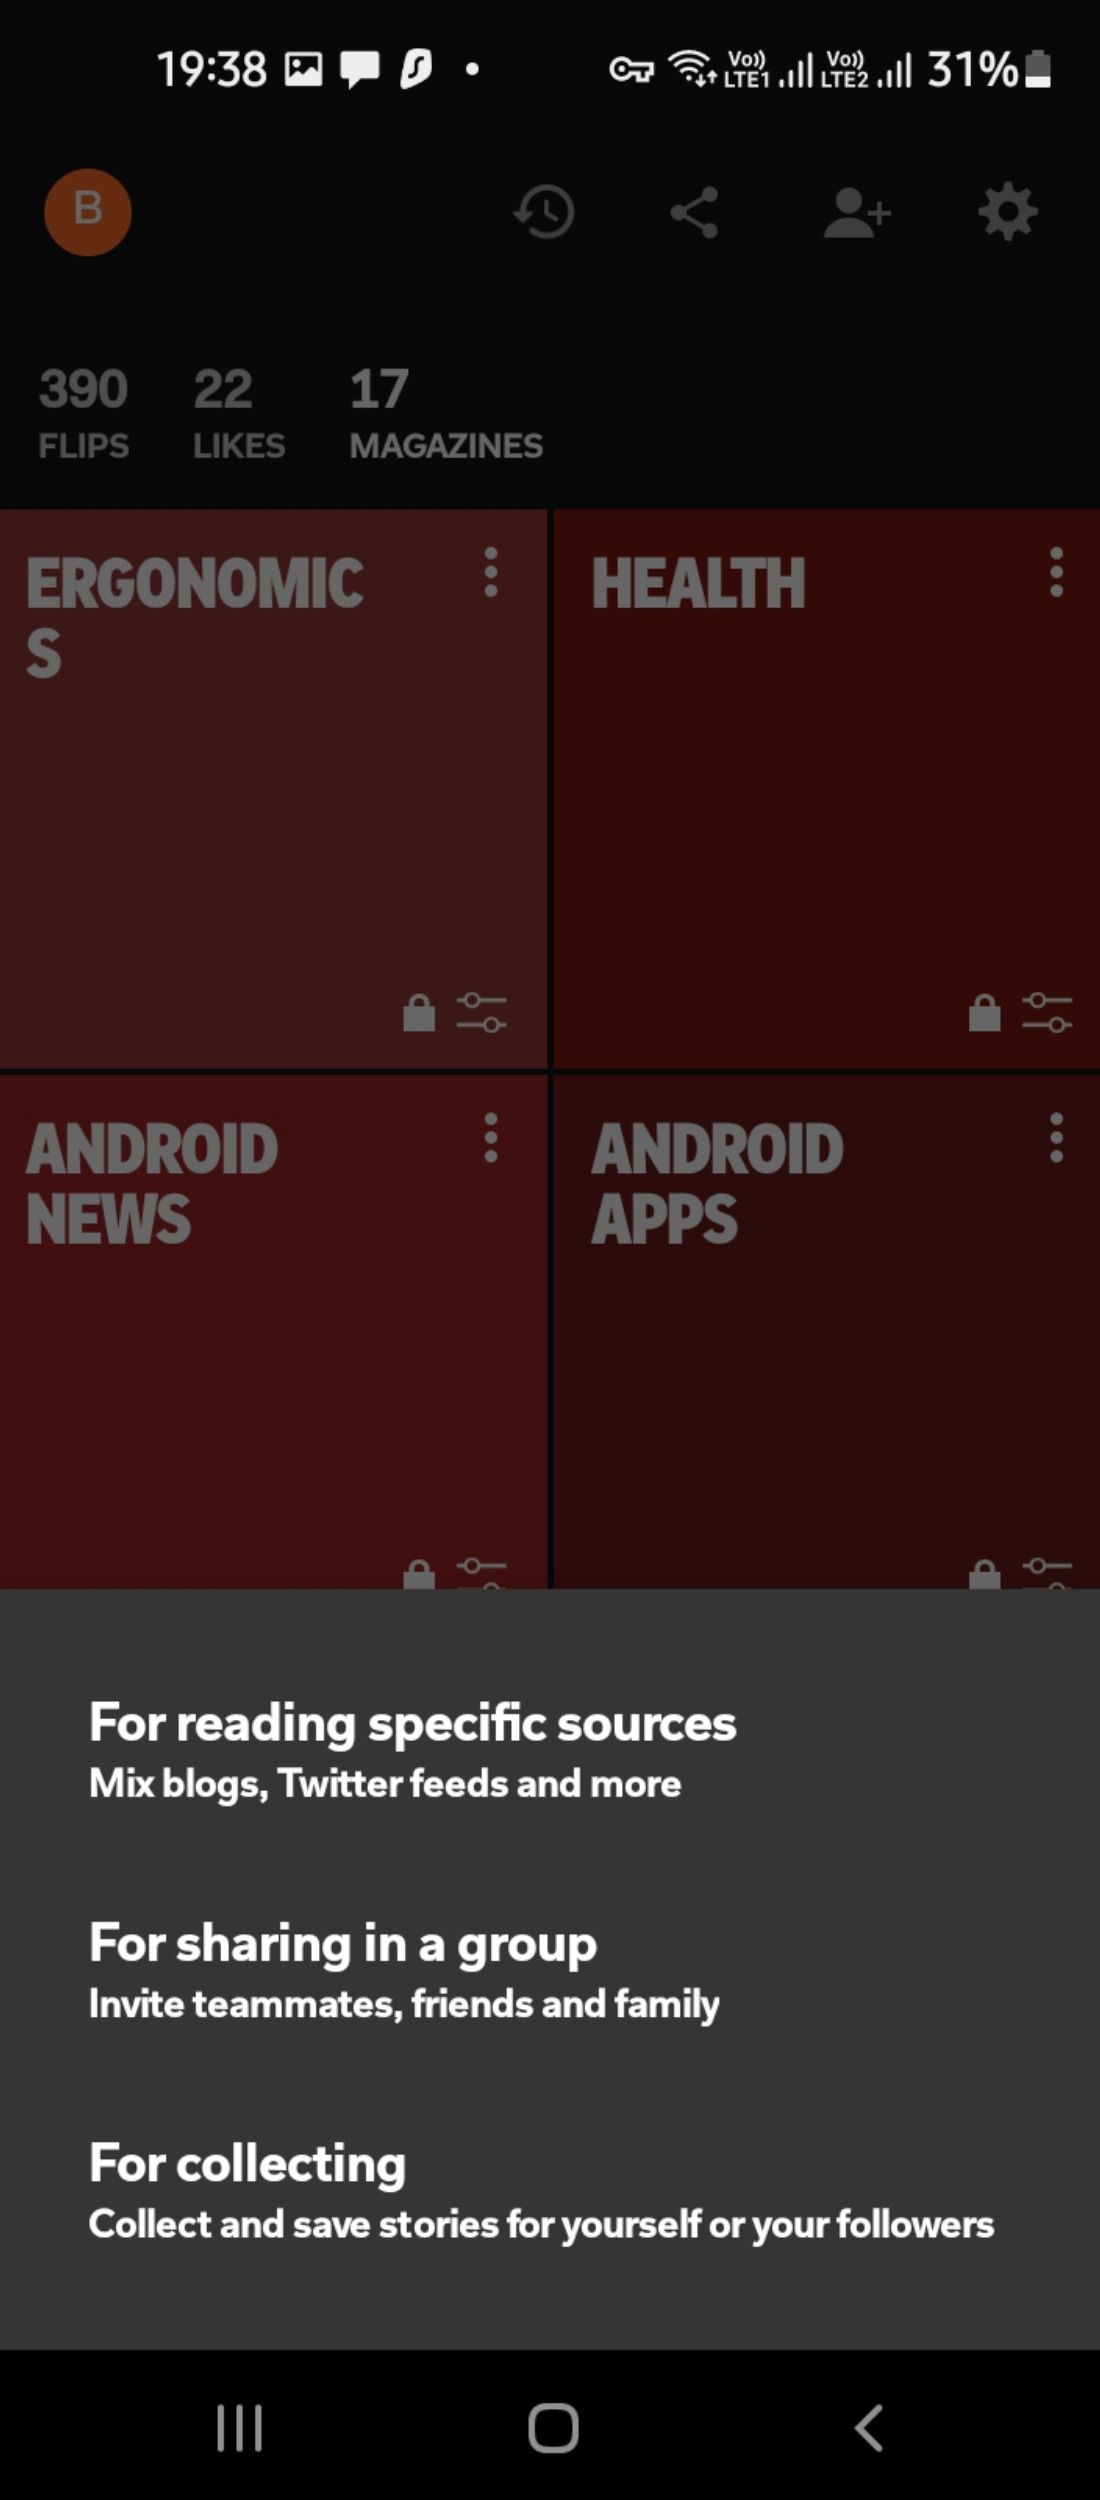 Curation of magazines and social feeds in Flipboard